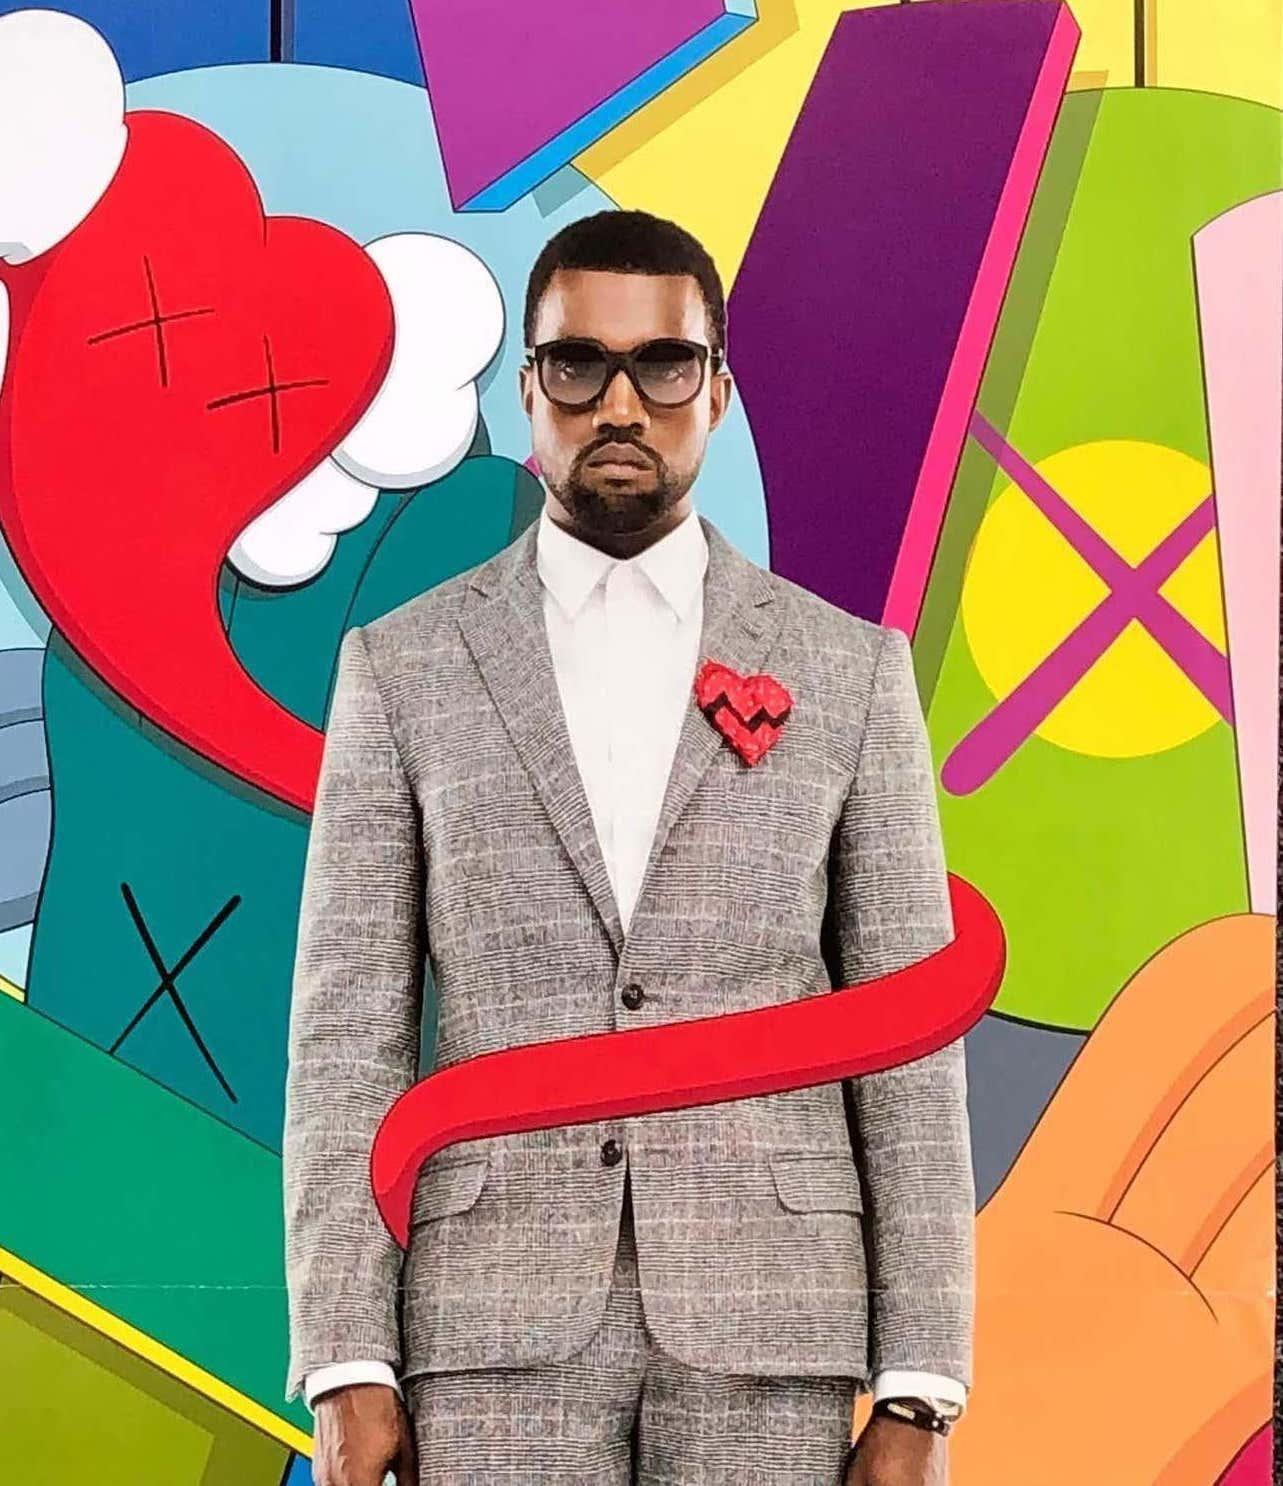 KAWS Illustration Art:
KAWS Kanye West 808s & Heartbreak album poster 2008.

Offset lithograph; 12 x 24 inches. 1st edition 2008. 

Good overall condition with the exception of some minor signs of handling; contains center-fold as originally